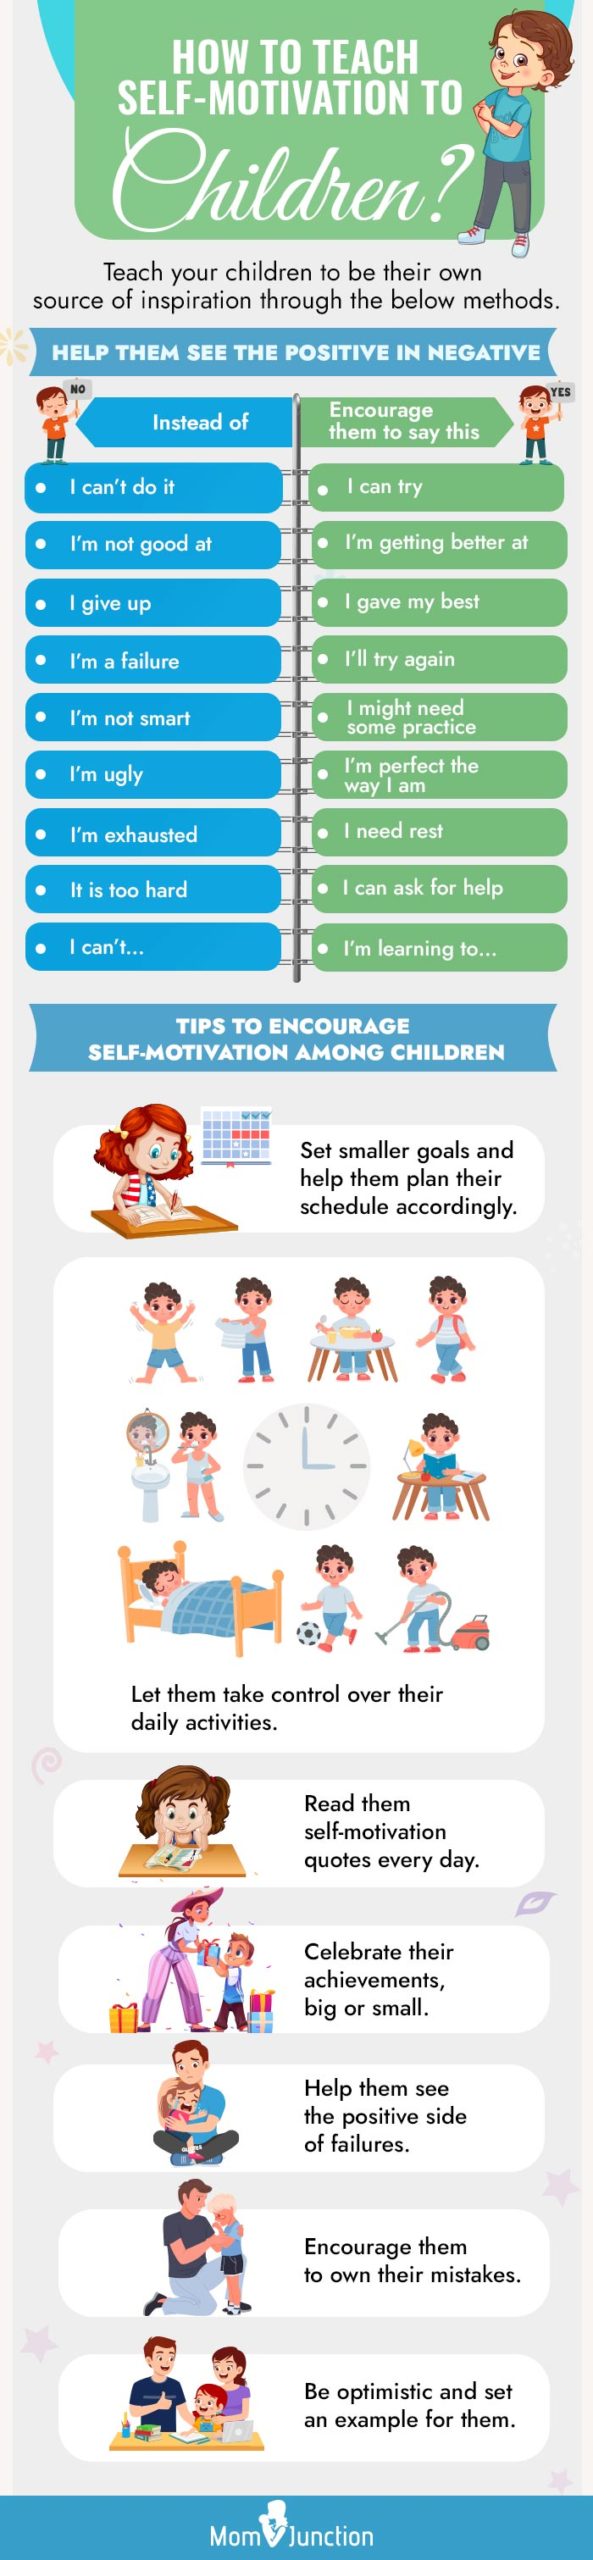 how to teach self-motivation to children (infographic)